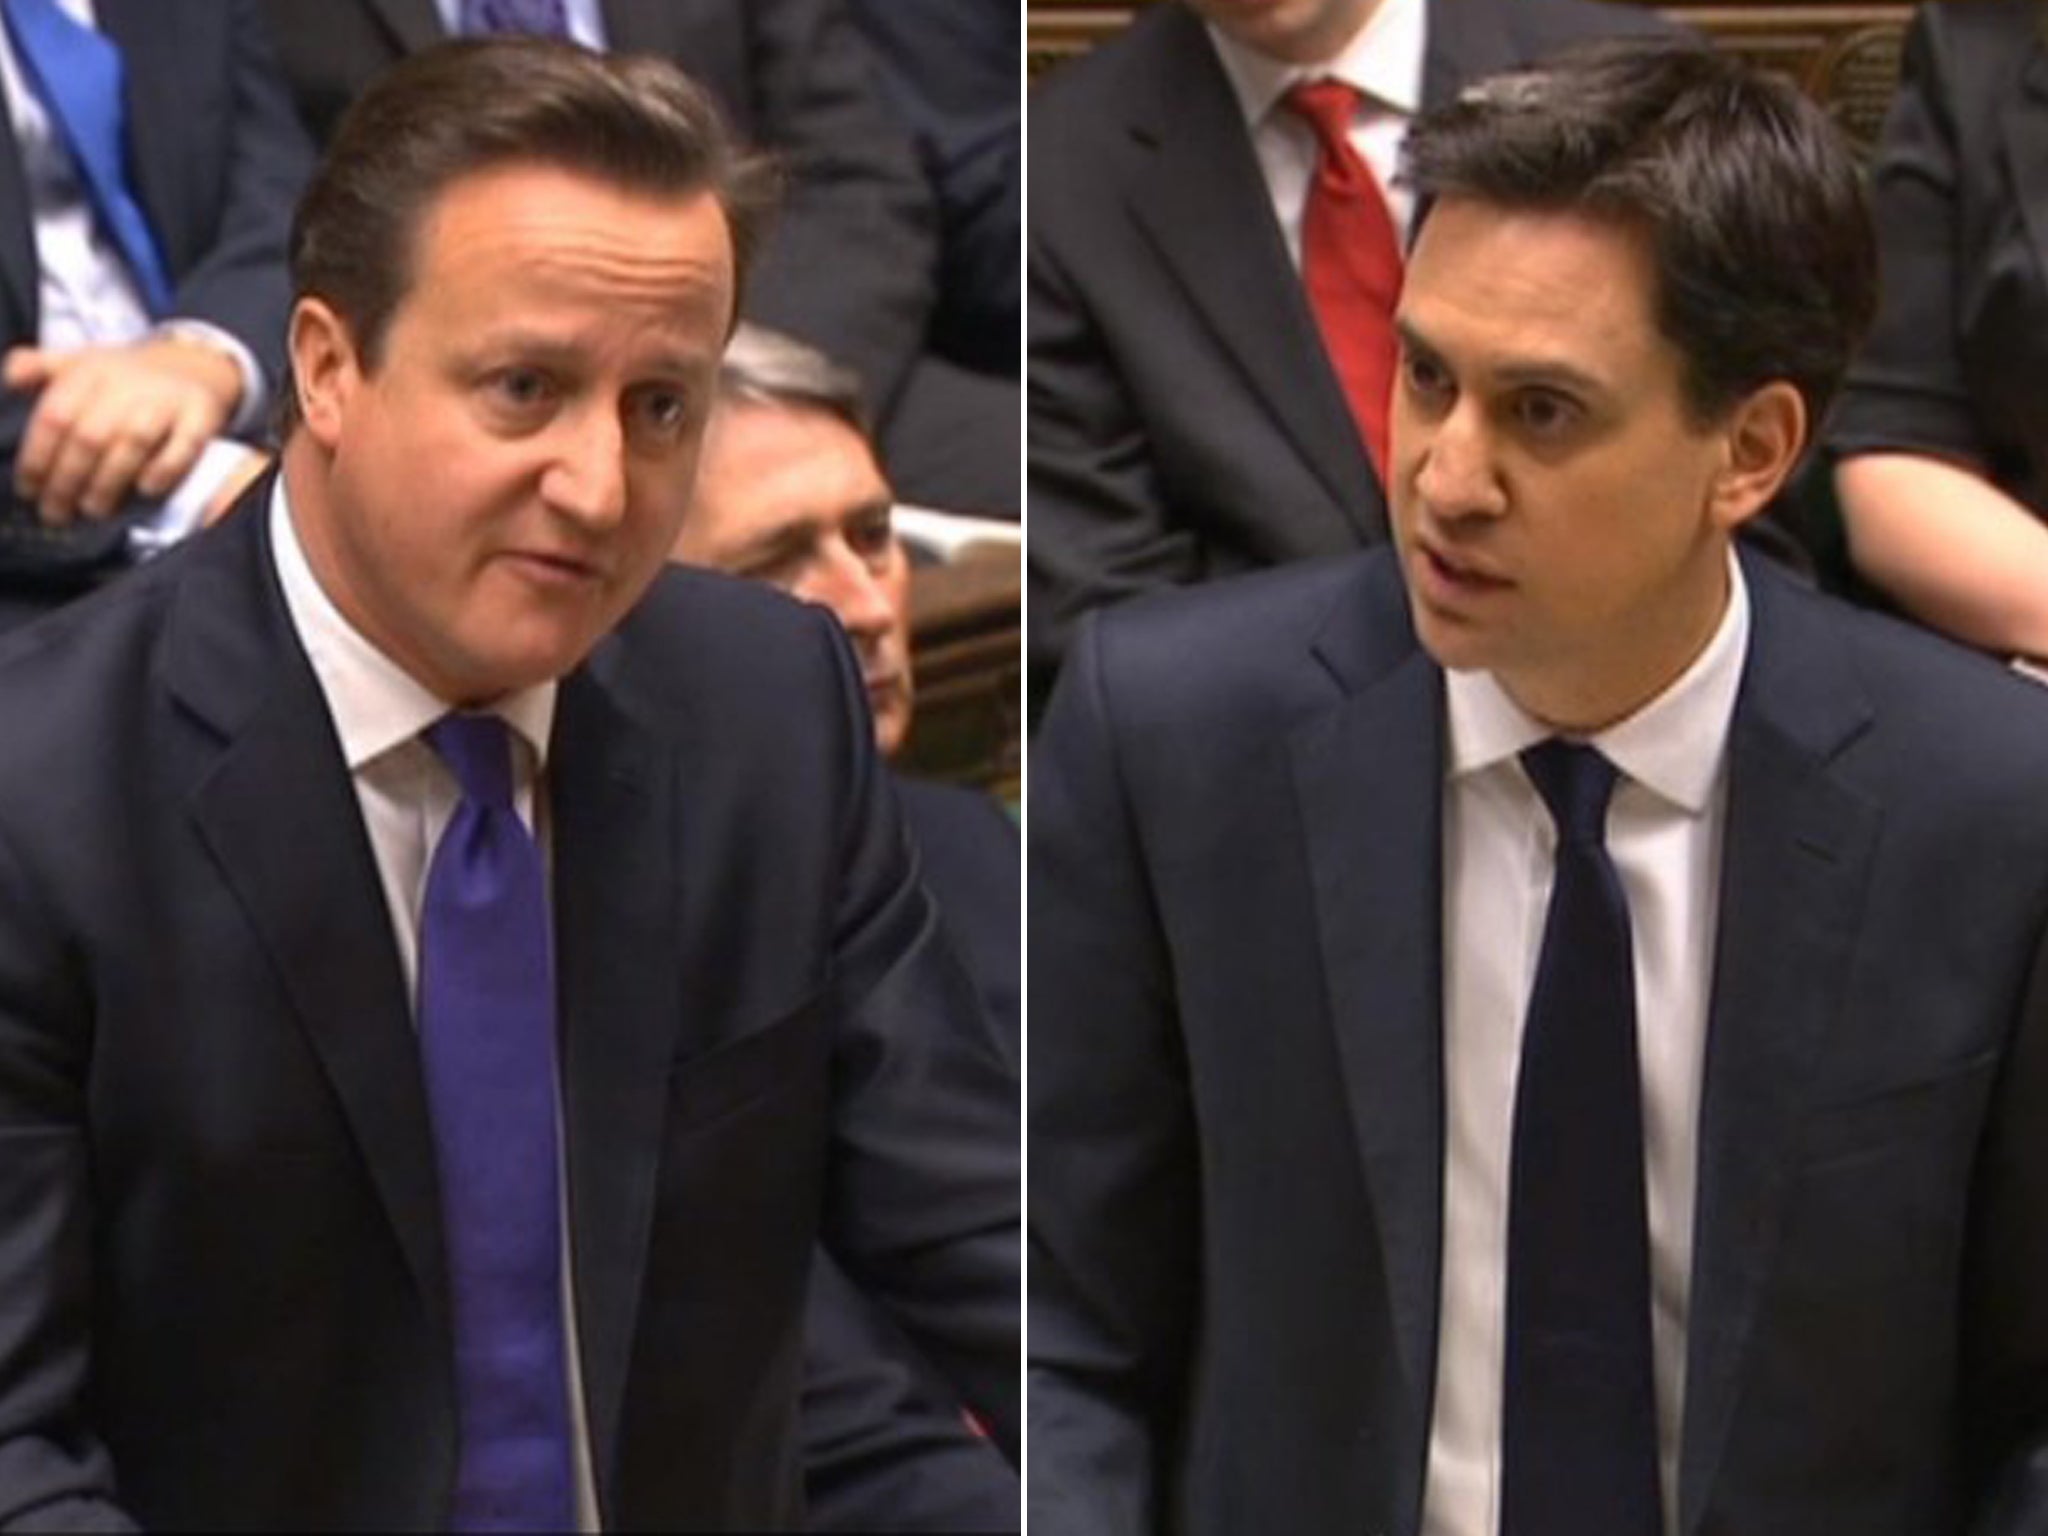 In stormy clashes at Prime Minister’s Question Time, David Cameron called Ed Miliband a waste of space